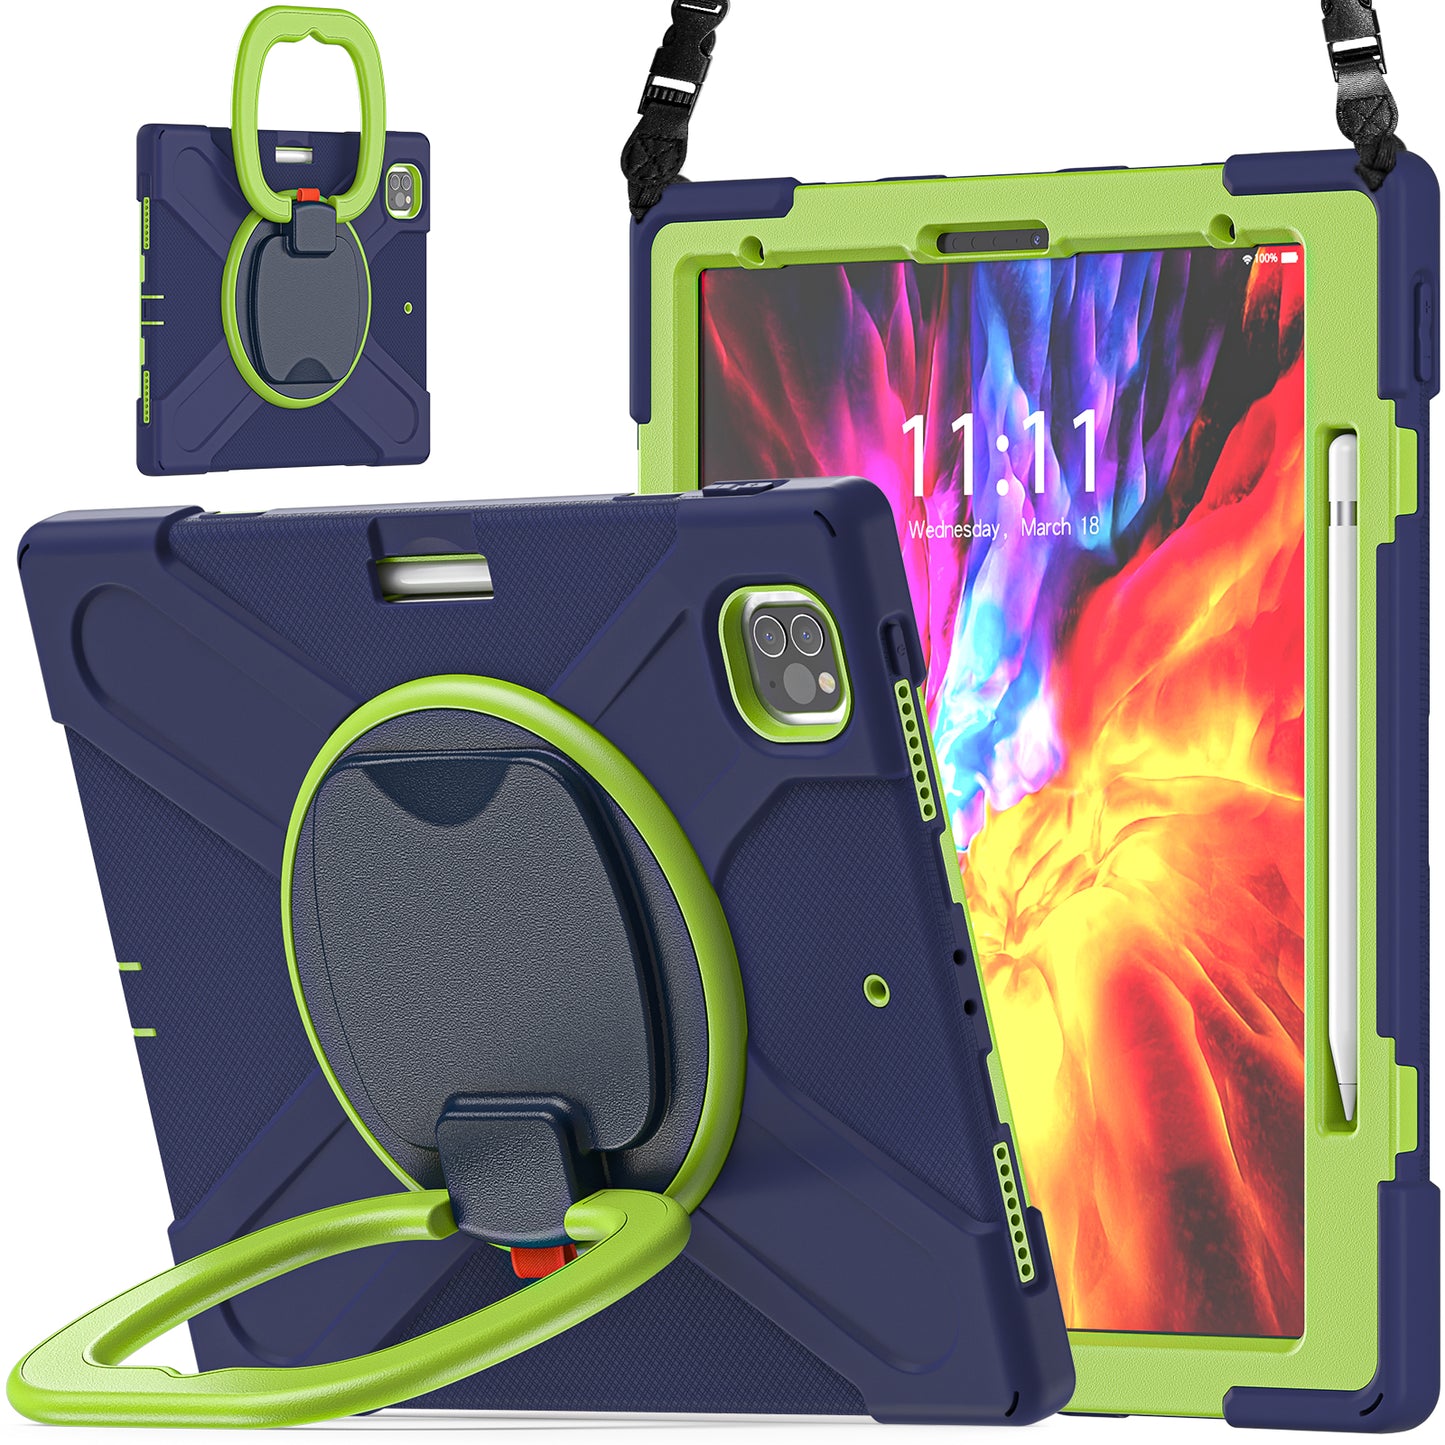 Pirate Box iPad Pro 11 (2018) Case Hook Stand Rotating Hand Holder Shoulder Strap